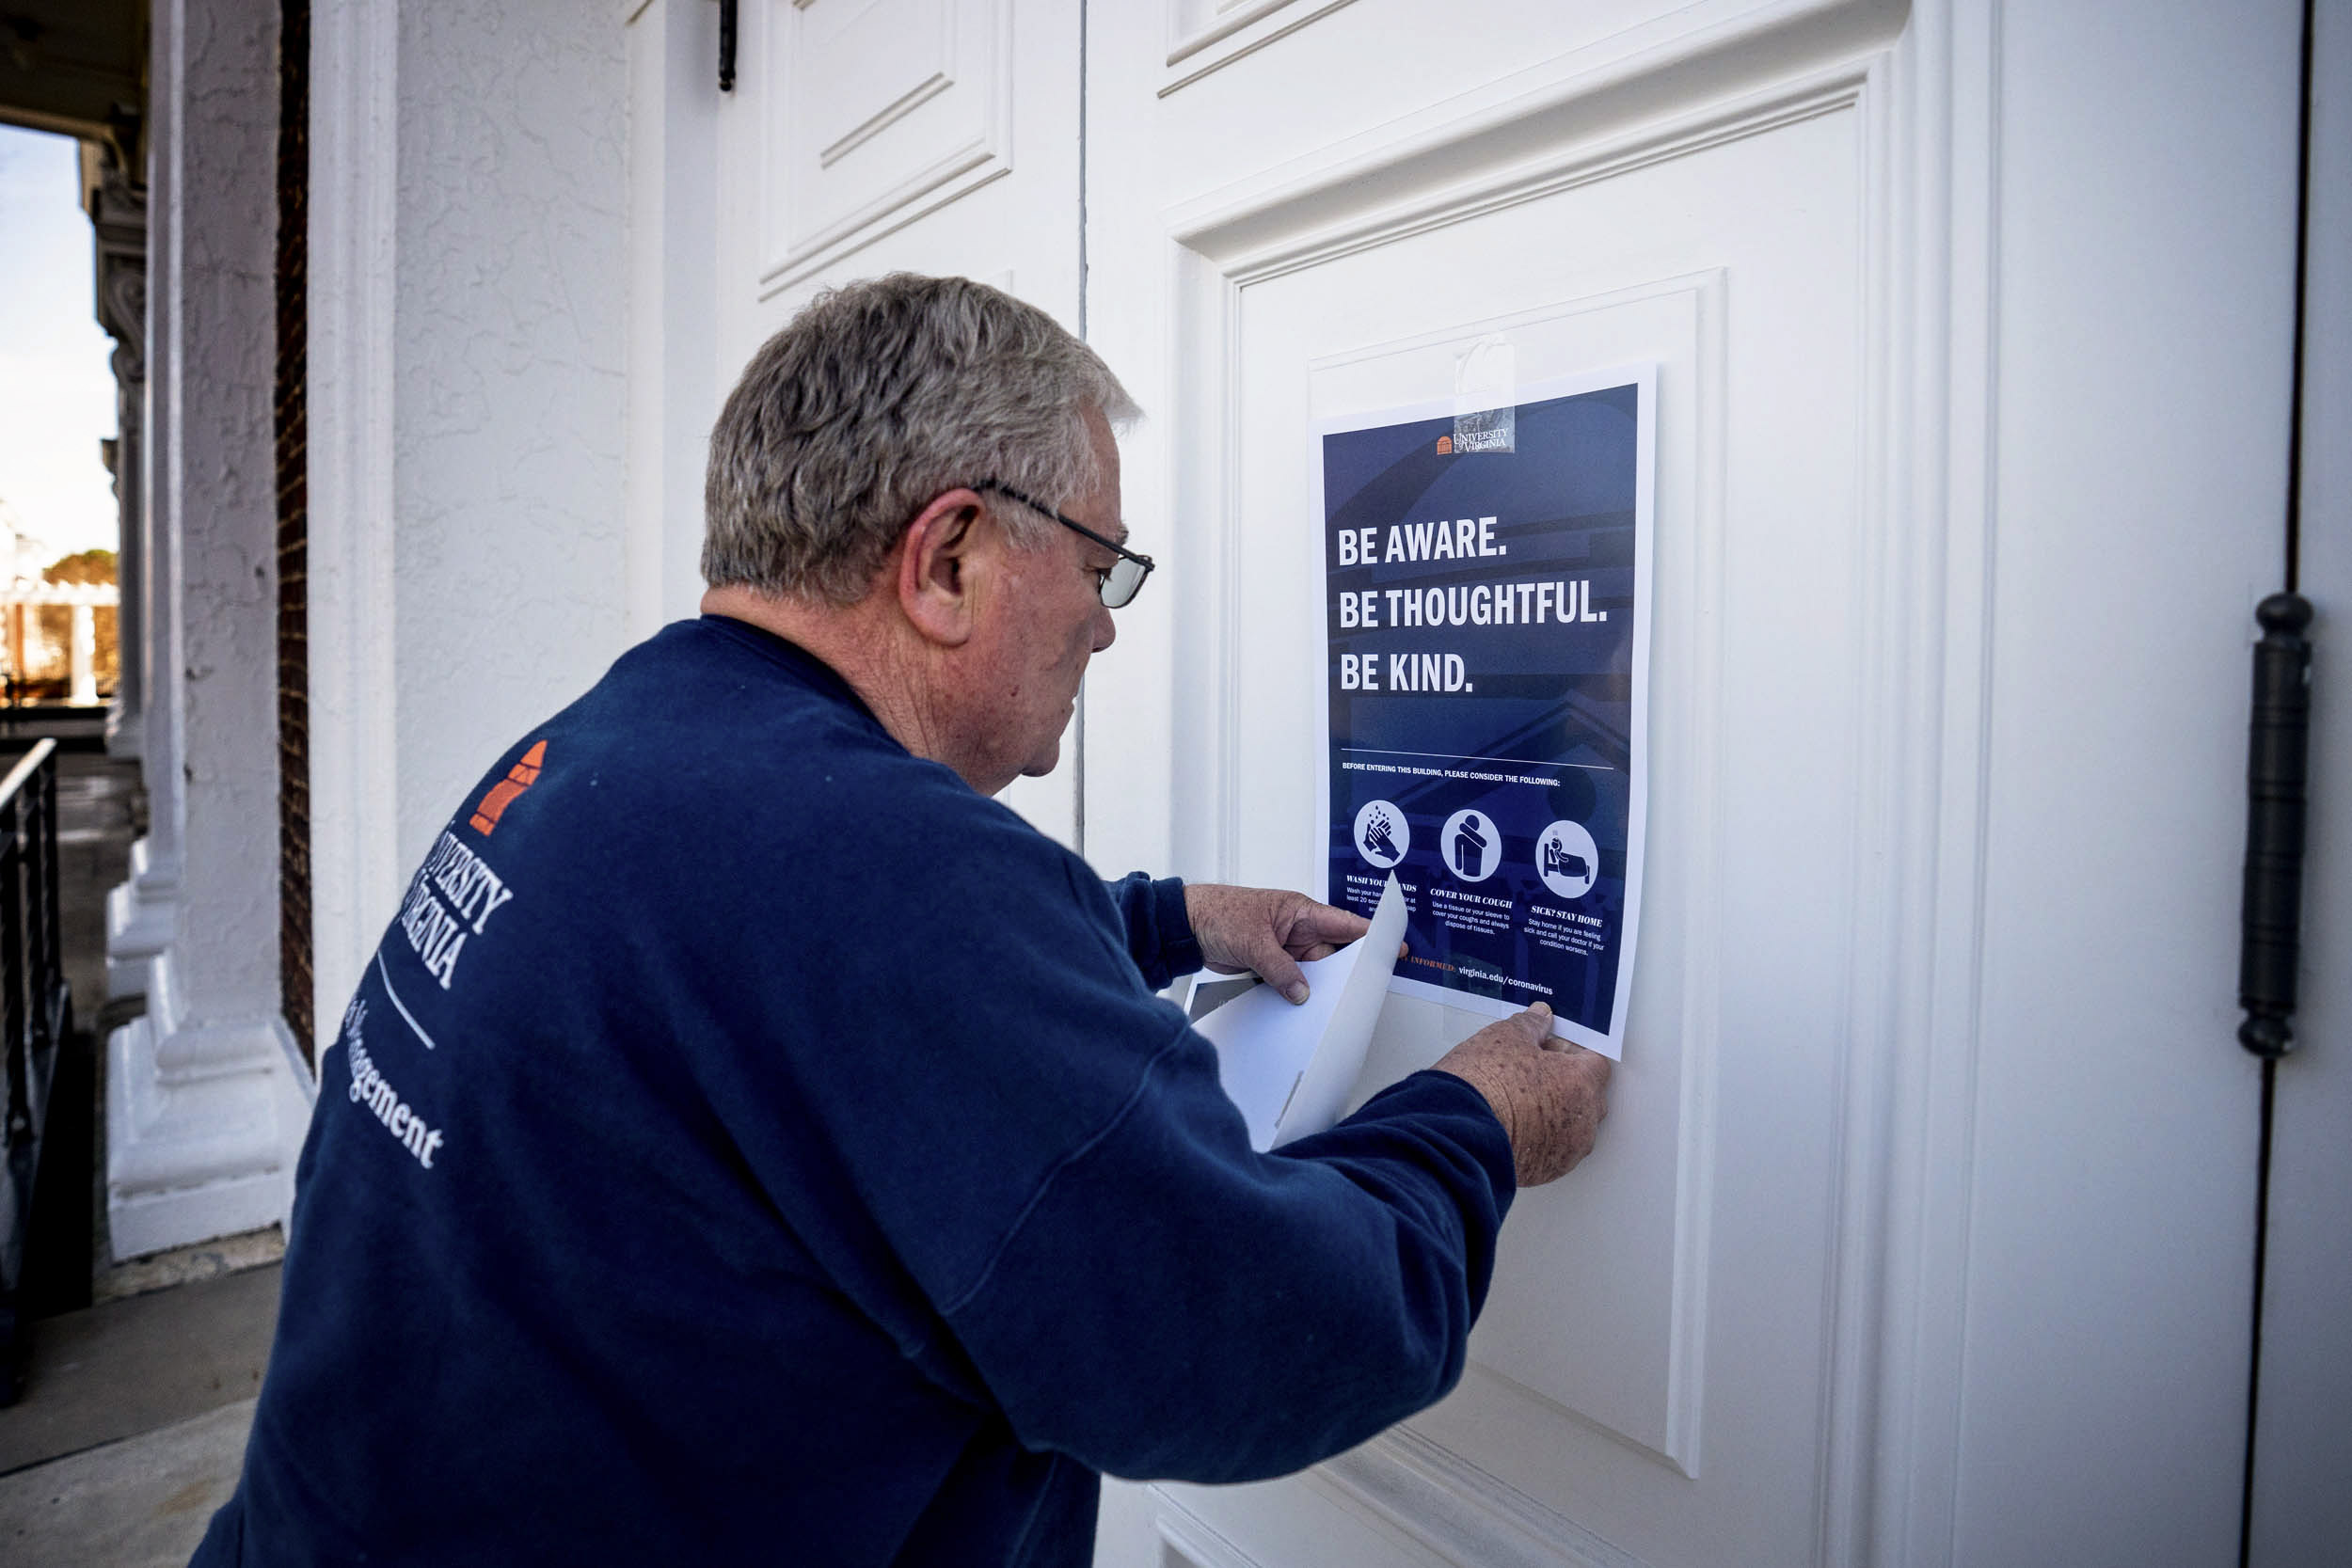 UVA staff member placing a sign on the door of a UVA building